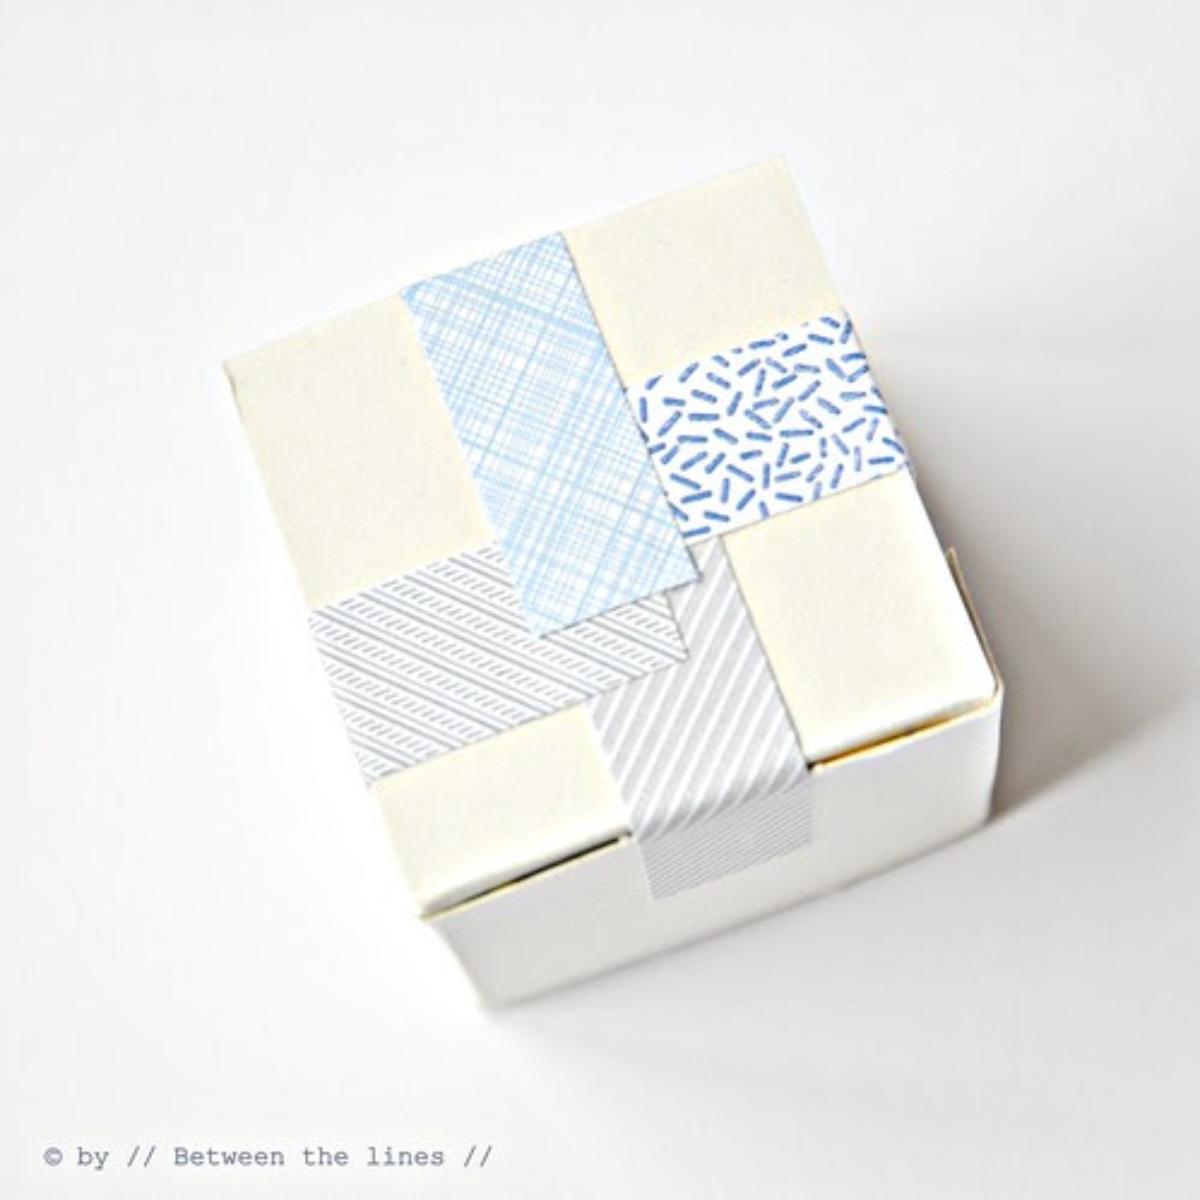 DIY Japanese tape gift wrapping.